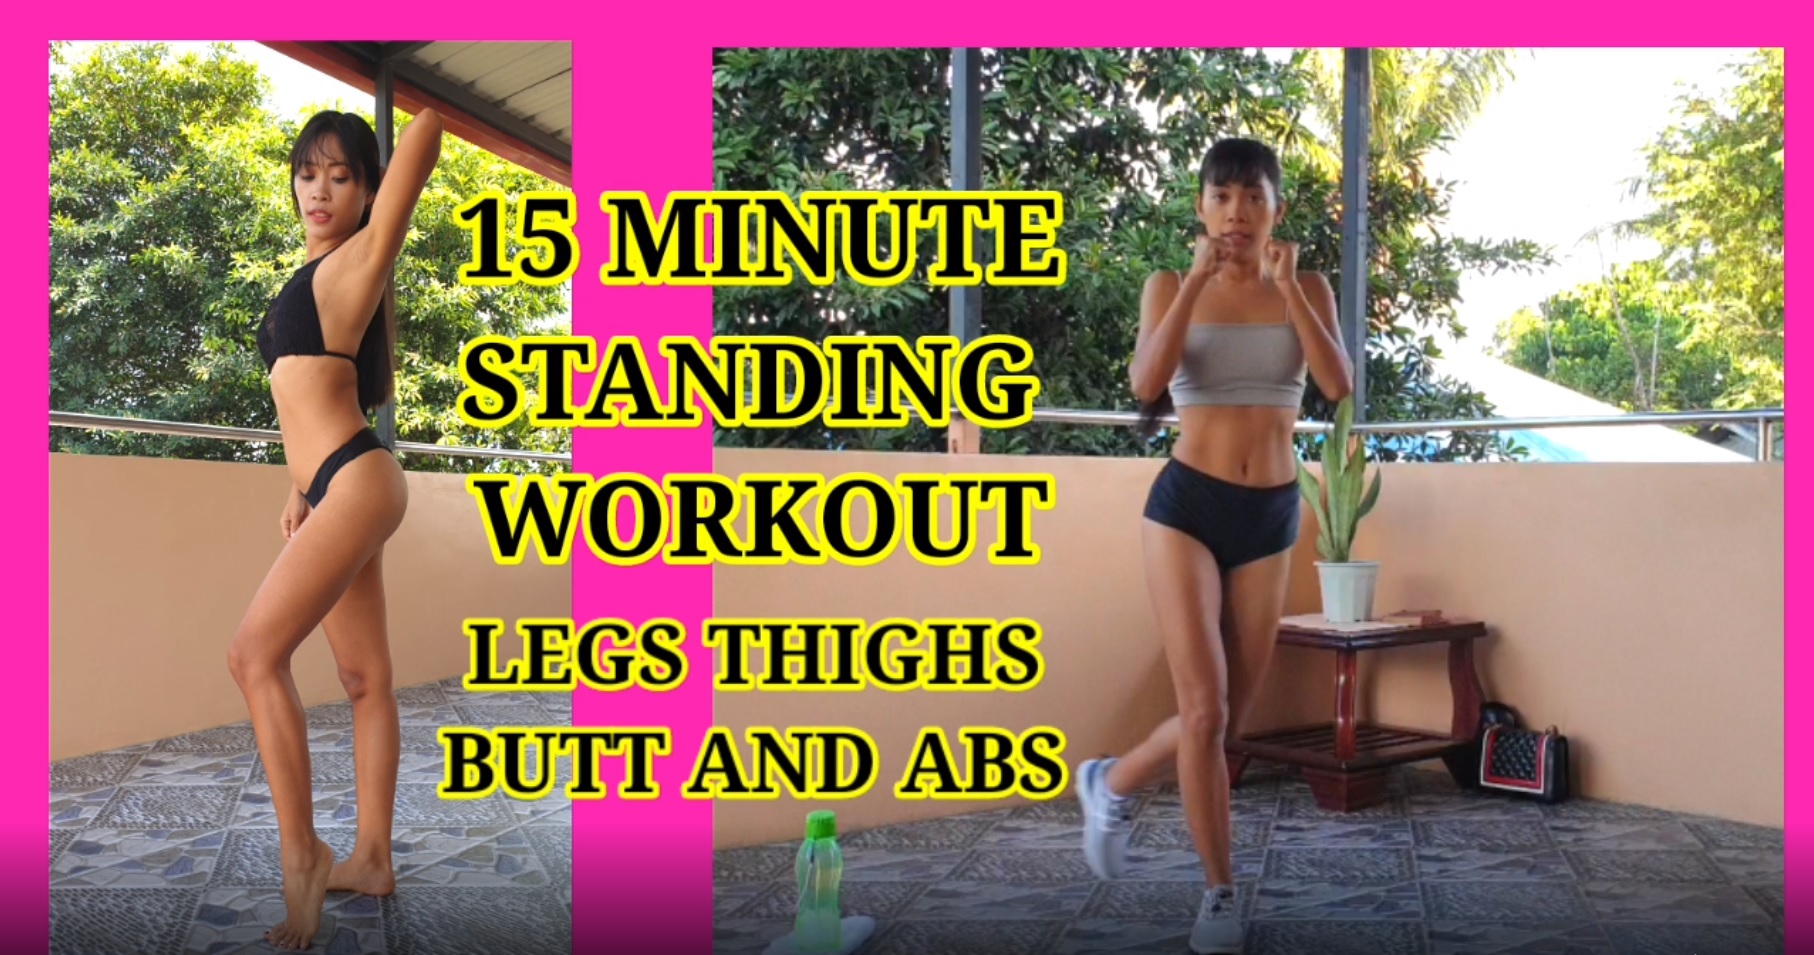 15 Minute Standing Workout Legs Thighs Butt and ABS, Lower Body